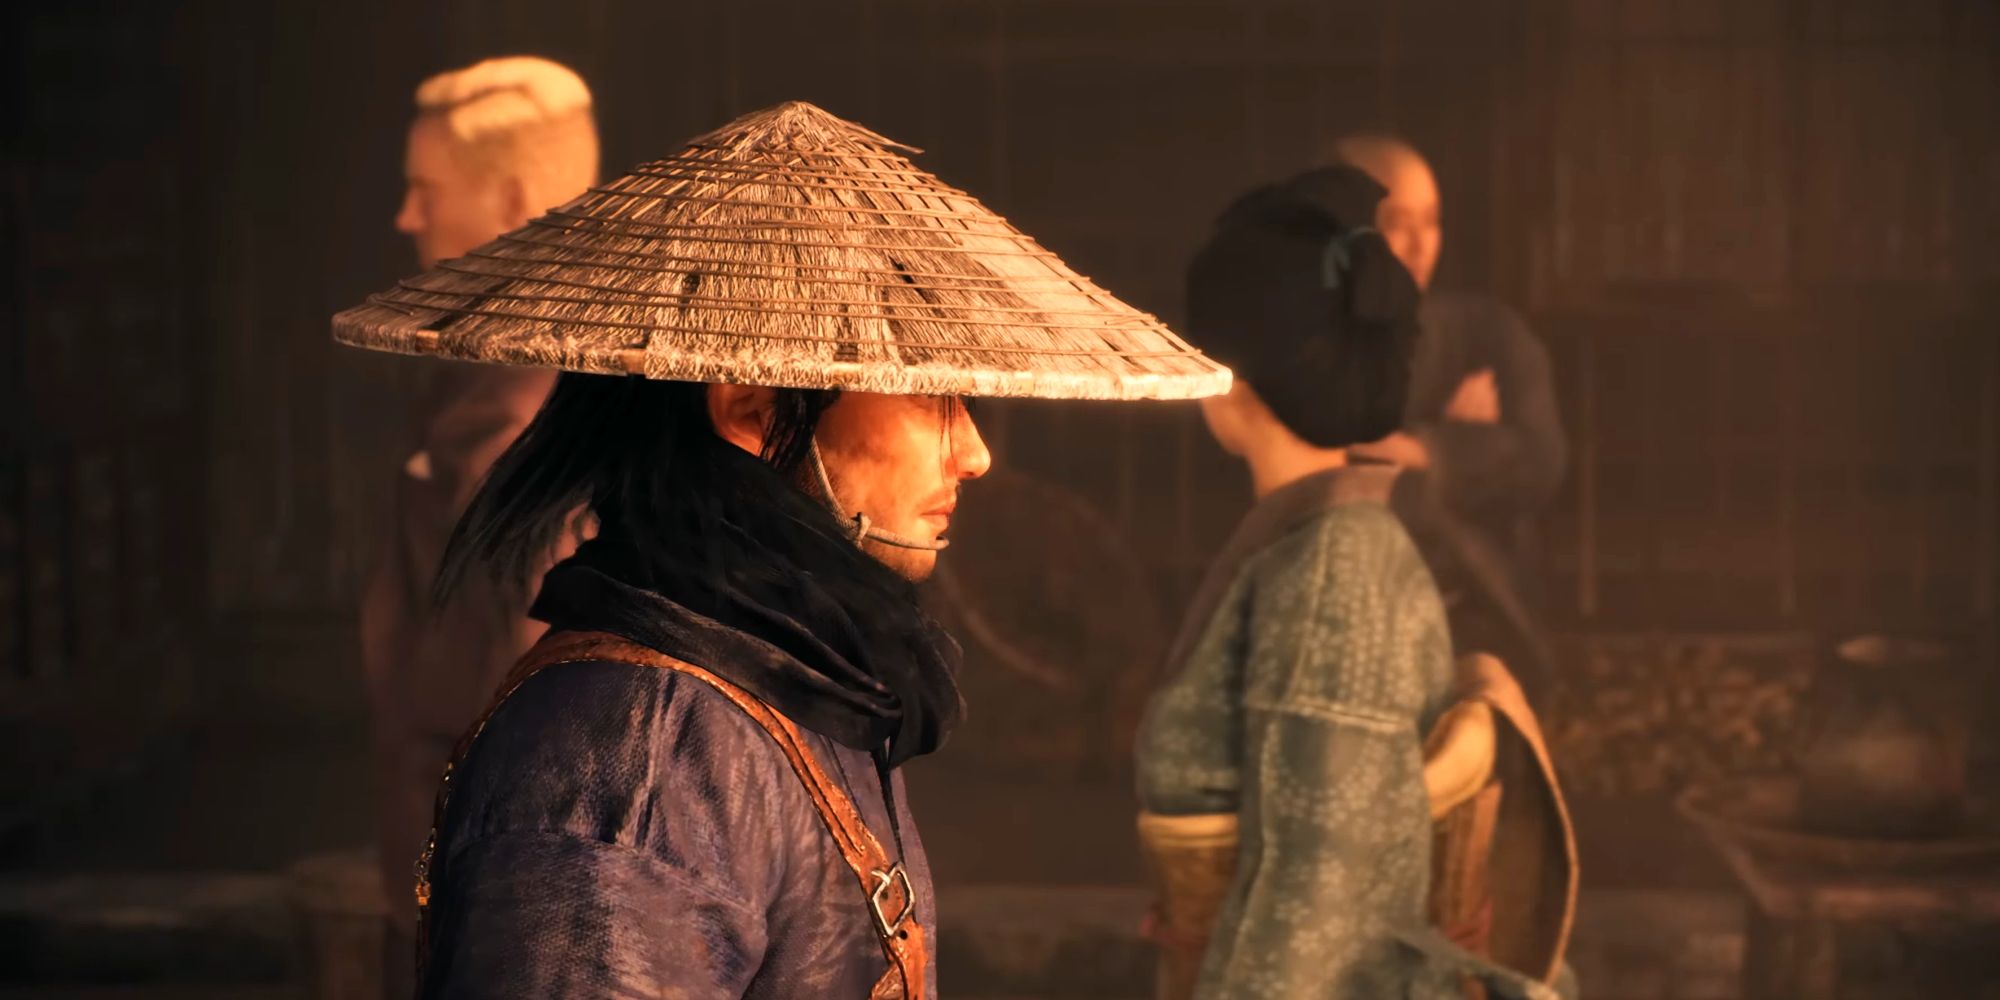 Rise of the Ronin gets March release date, pre-order start later this month